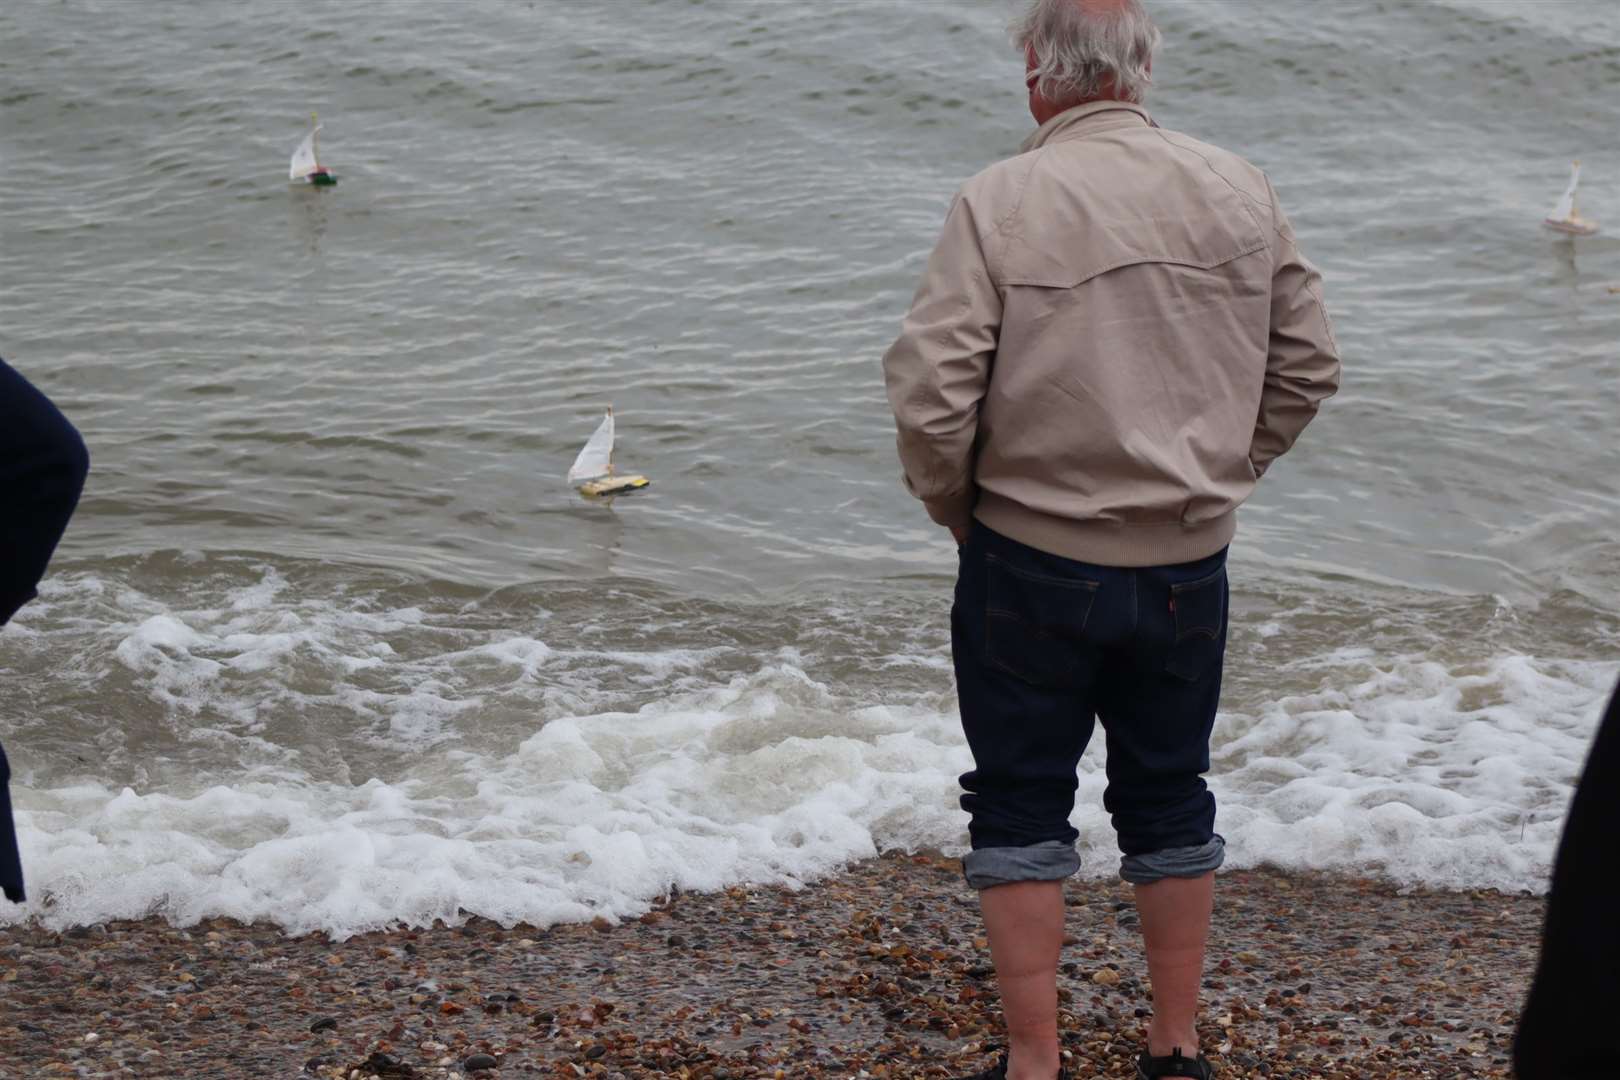 Solicitor Richard Murr watches from the beach as his two boats take to the water at Minster, Sheppey, for the launch of the Freemasons' Great East Kent Boat Race